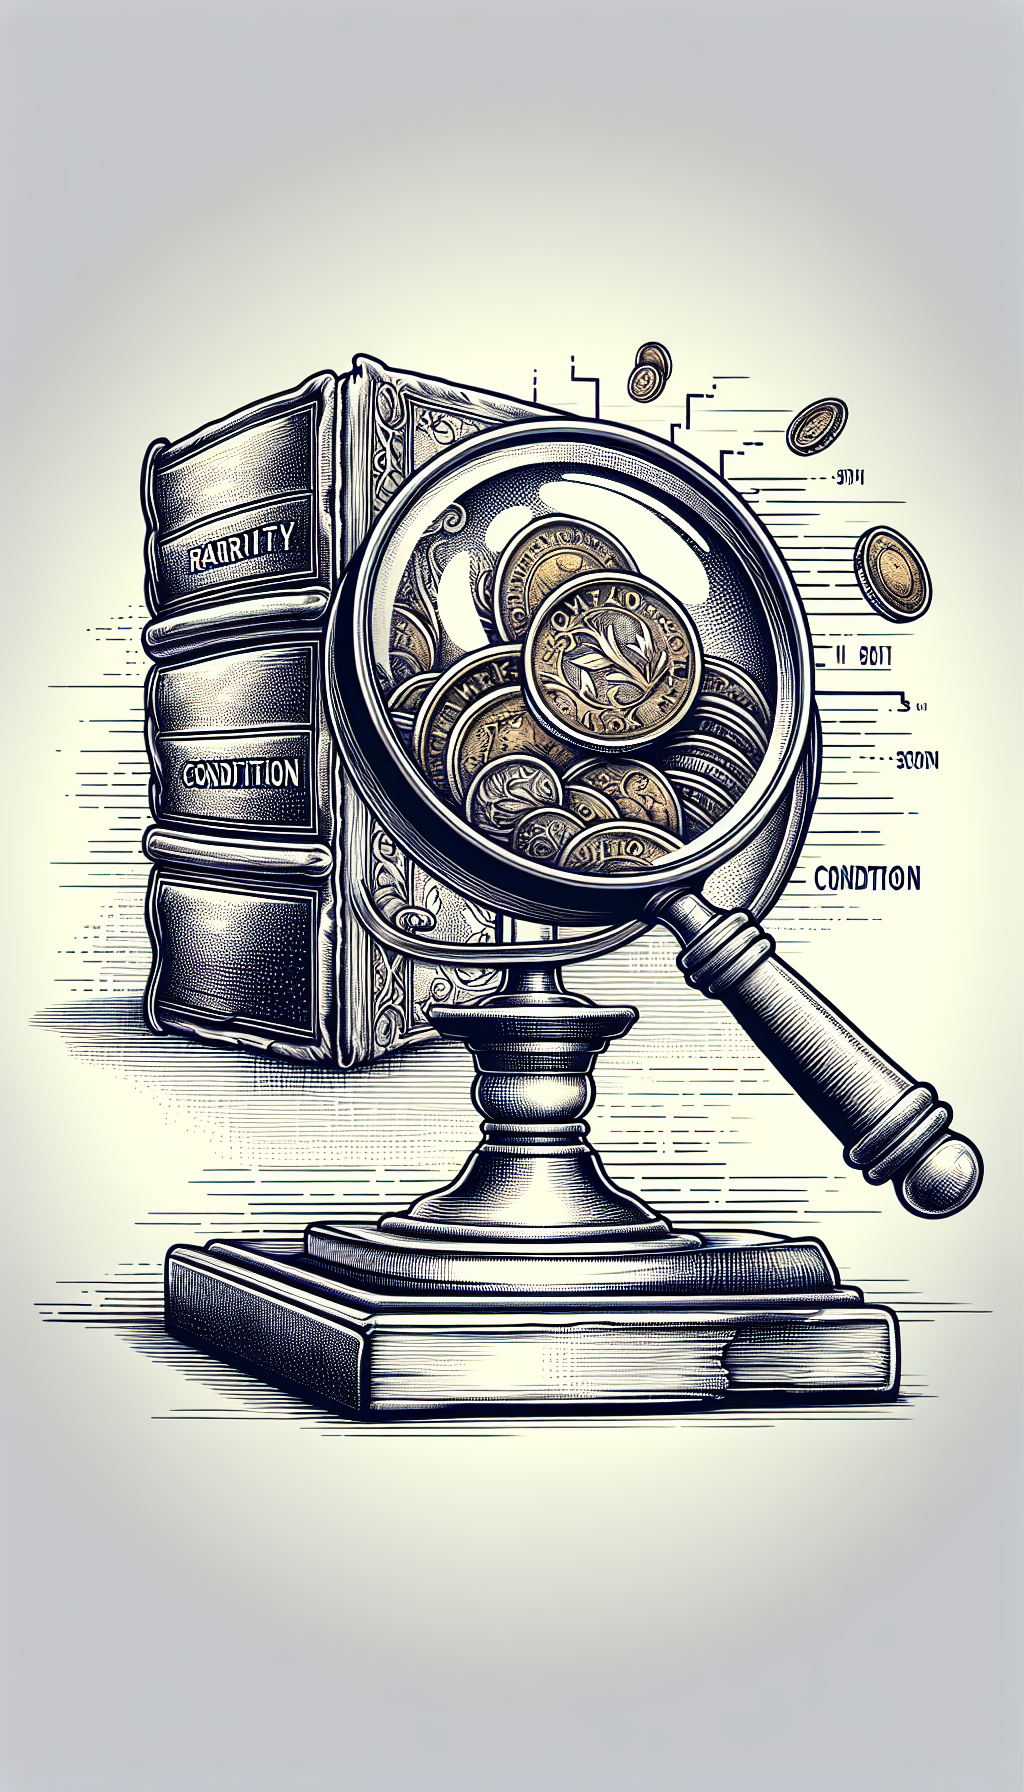 An illustration shows a magnifying glass poised over an ancient book, with "Rarity" and "Condition" written on its lenses. Gold coins and a faint condition scale are visible through the glass, symbolizing the fluctuation of antique book values. The book sits atop a podium labeled "3." The intricate line art style contrasts with the realistic shading of the book, coins, and podium.